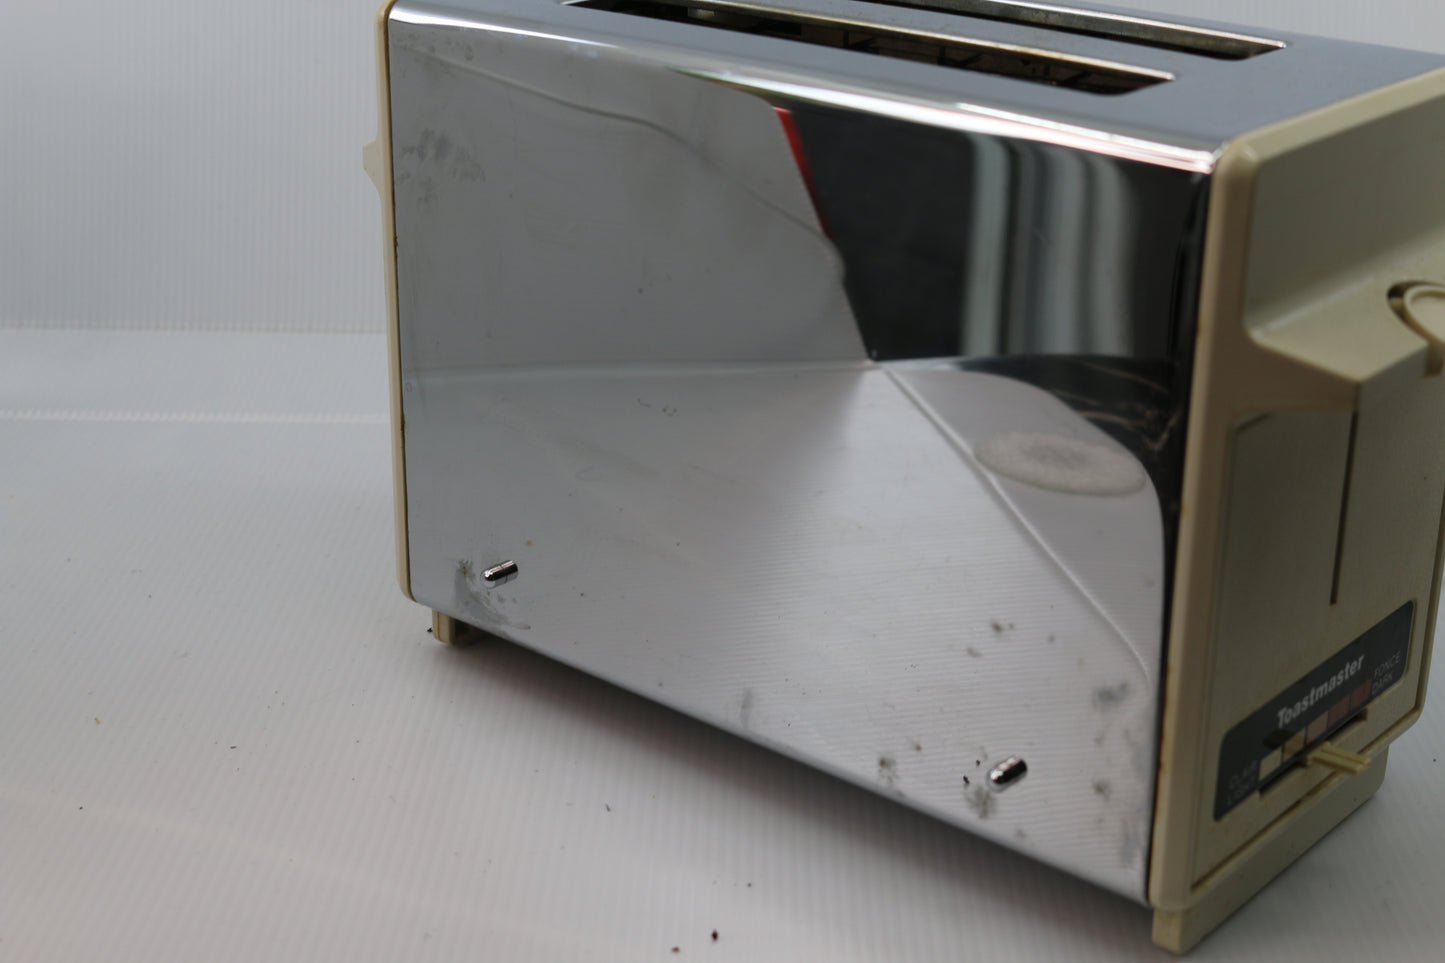 Vintage Toastmaster 2-Slice Pastry Toaster Chrome and Cream Model